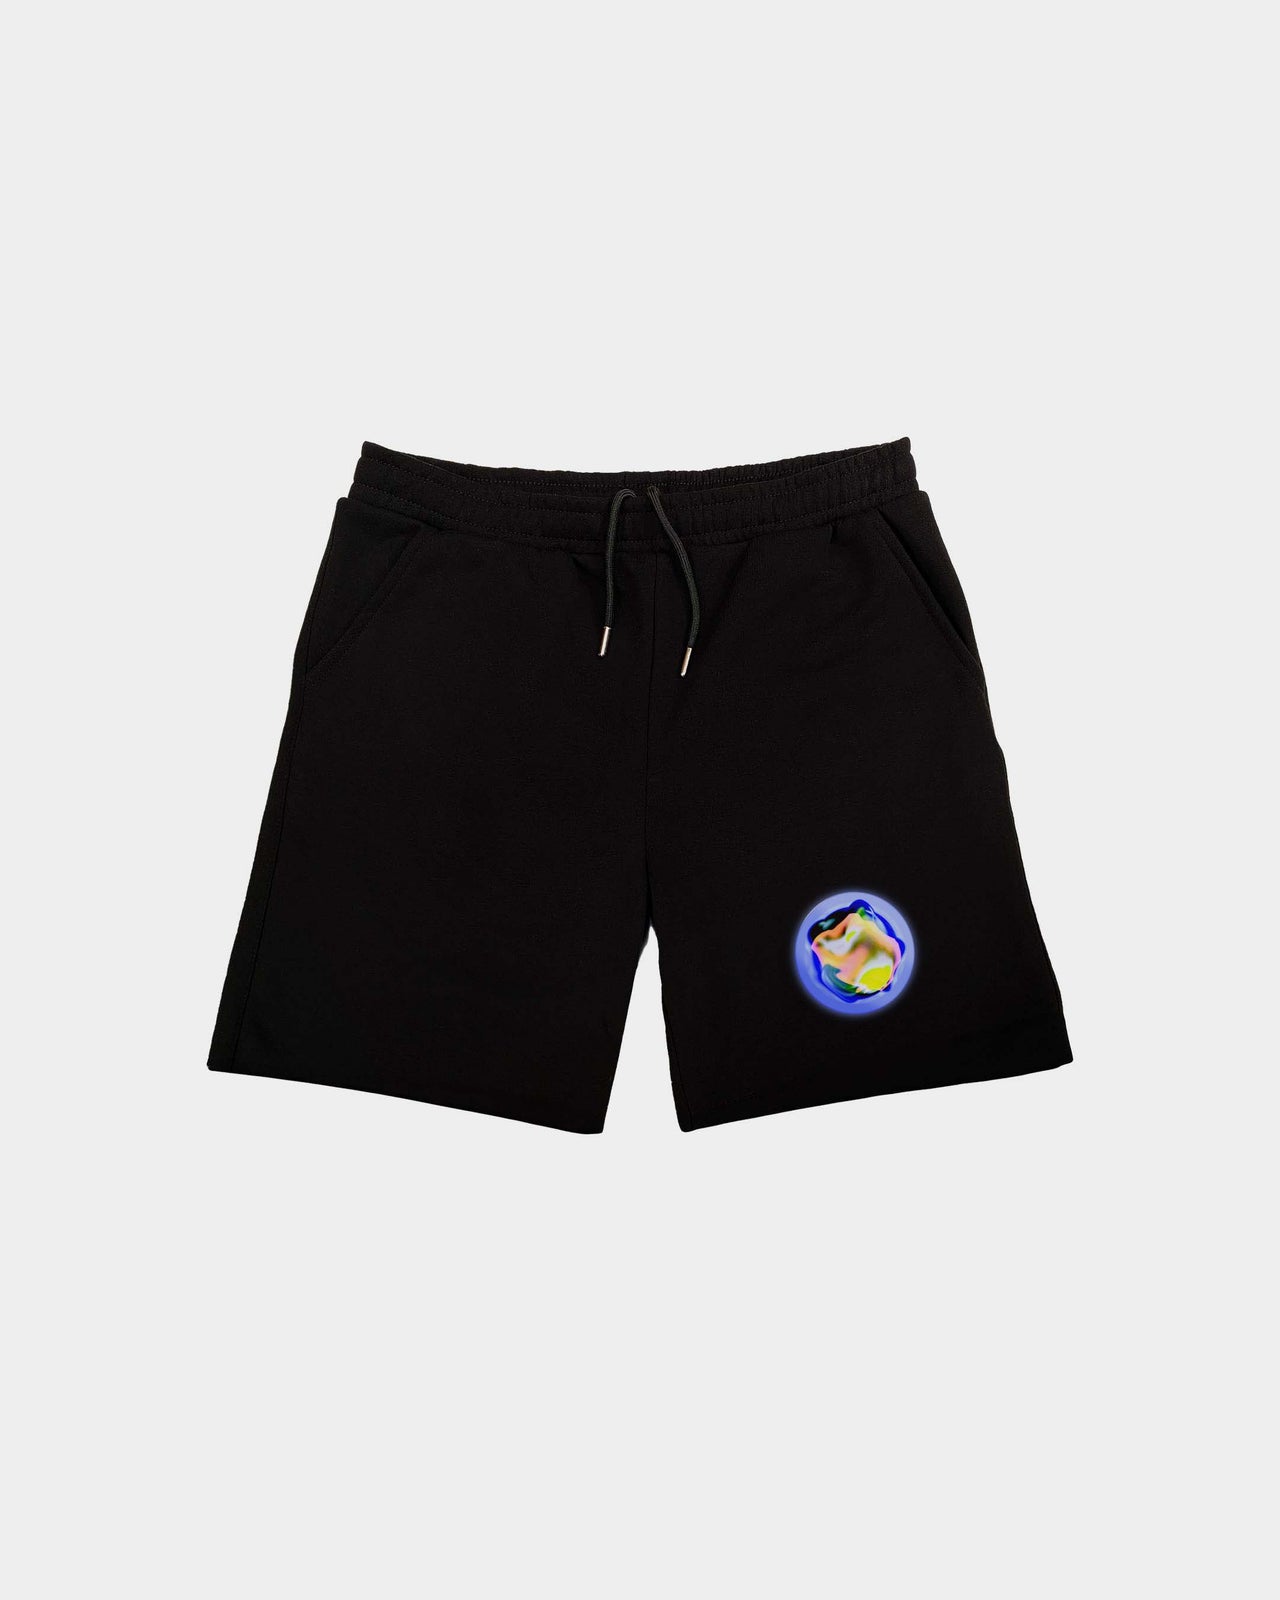 Orb of Authenticity Men's Shorts